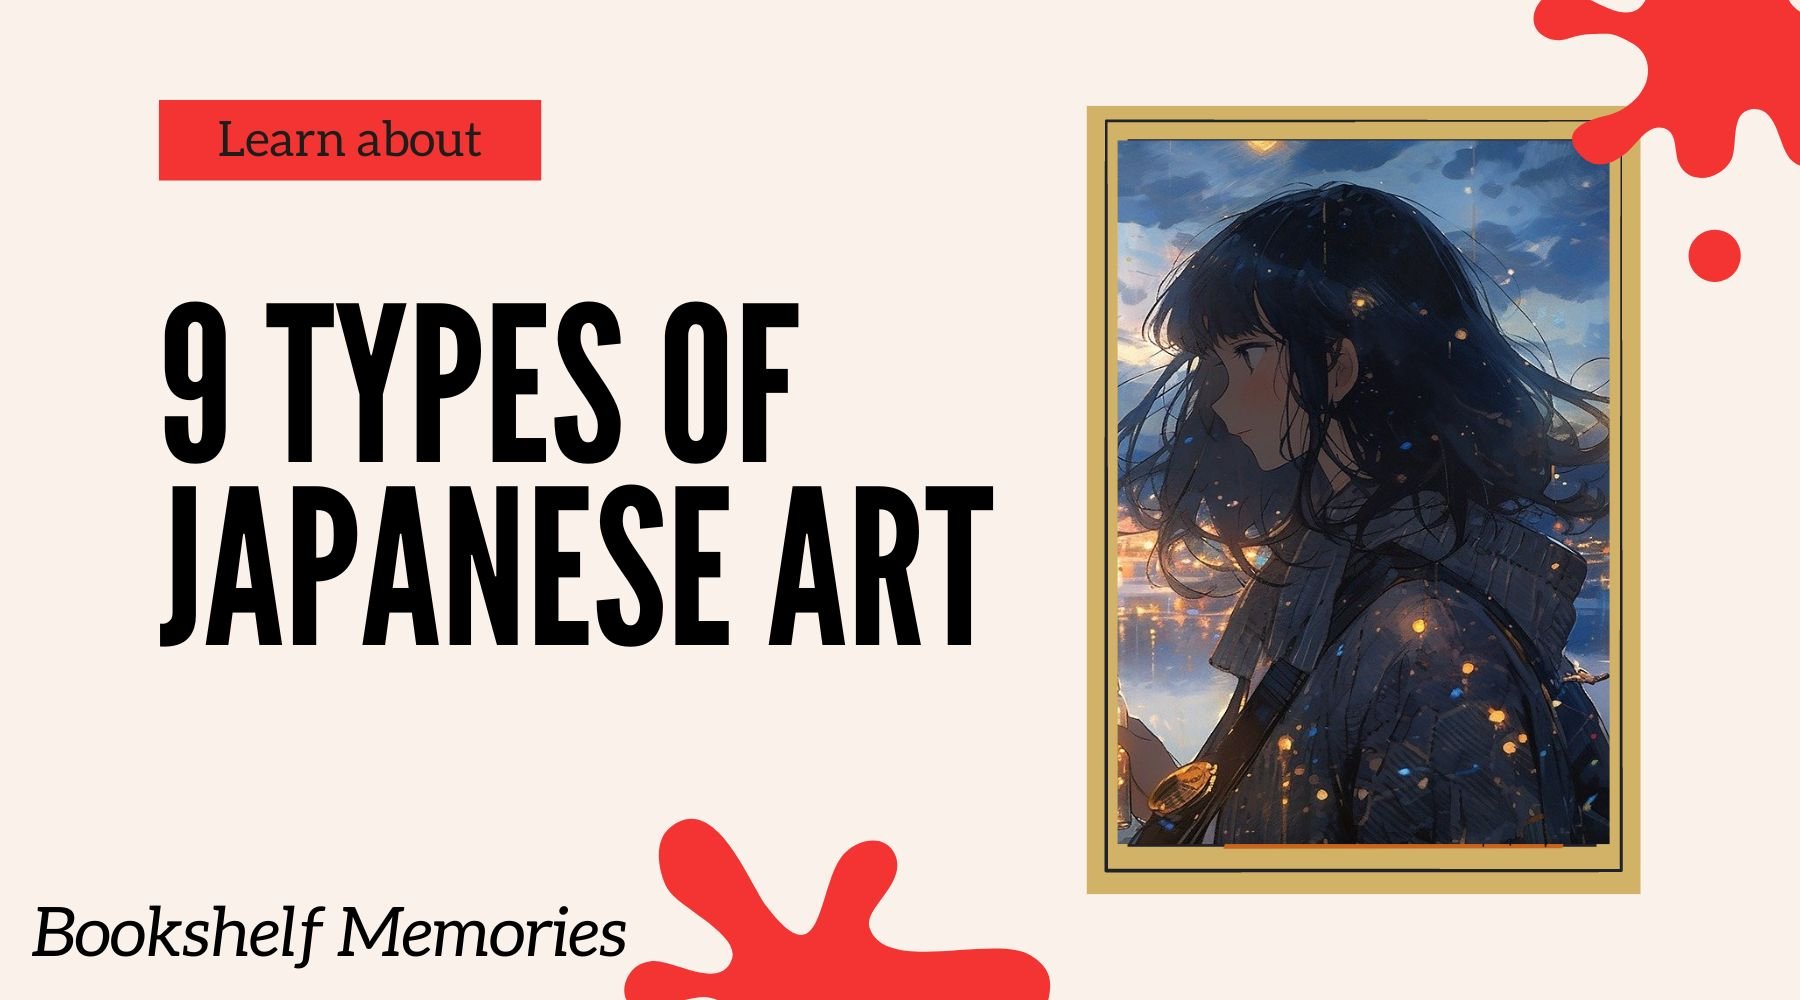 Discover 9 Types of Japanese Art Forms and Styles - Bookshelf Memories